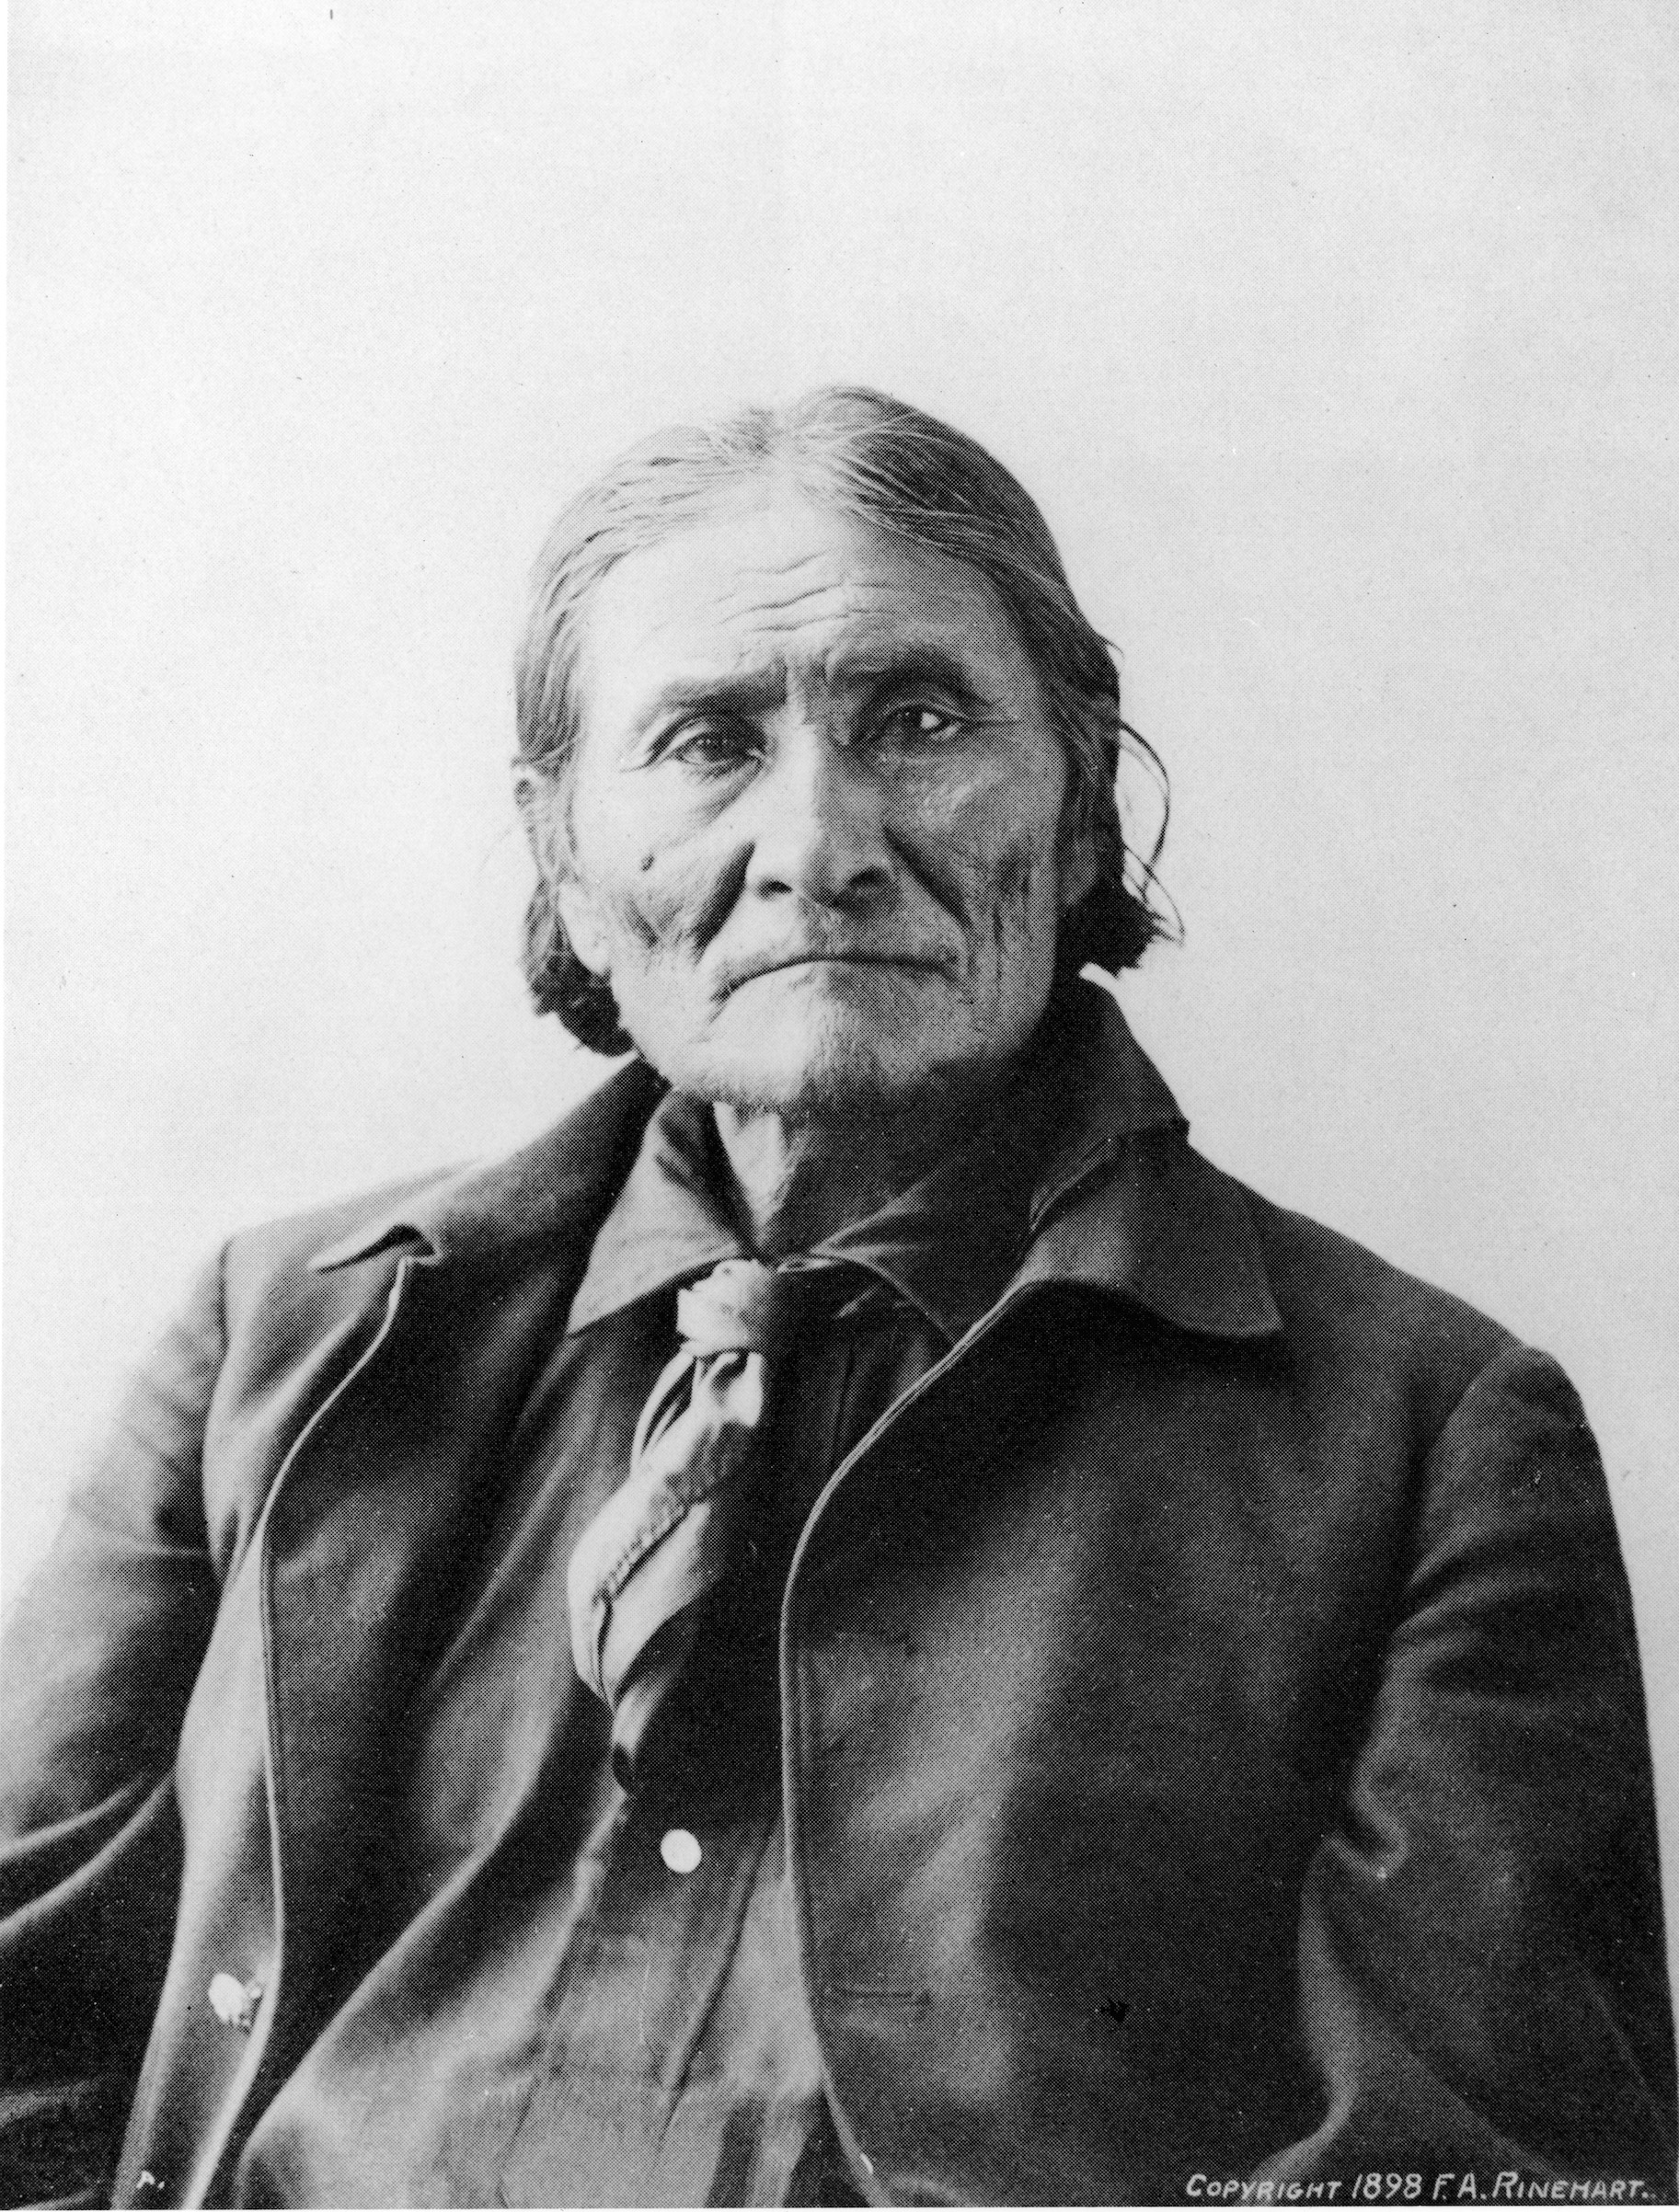 Portrait of Native American Indian chief Geronimo (1829 - 1909), 1890s. (Kean Collection/Getty Images)